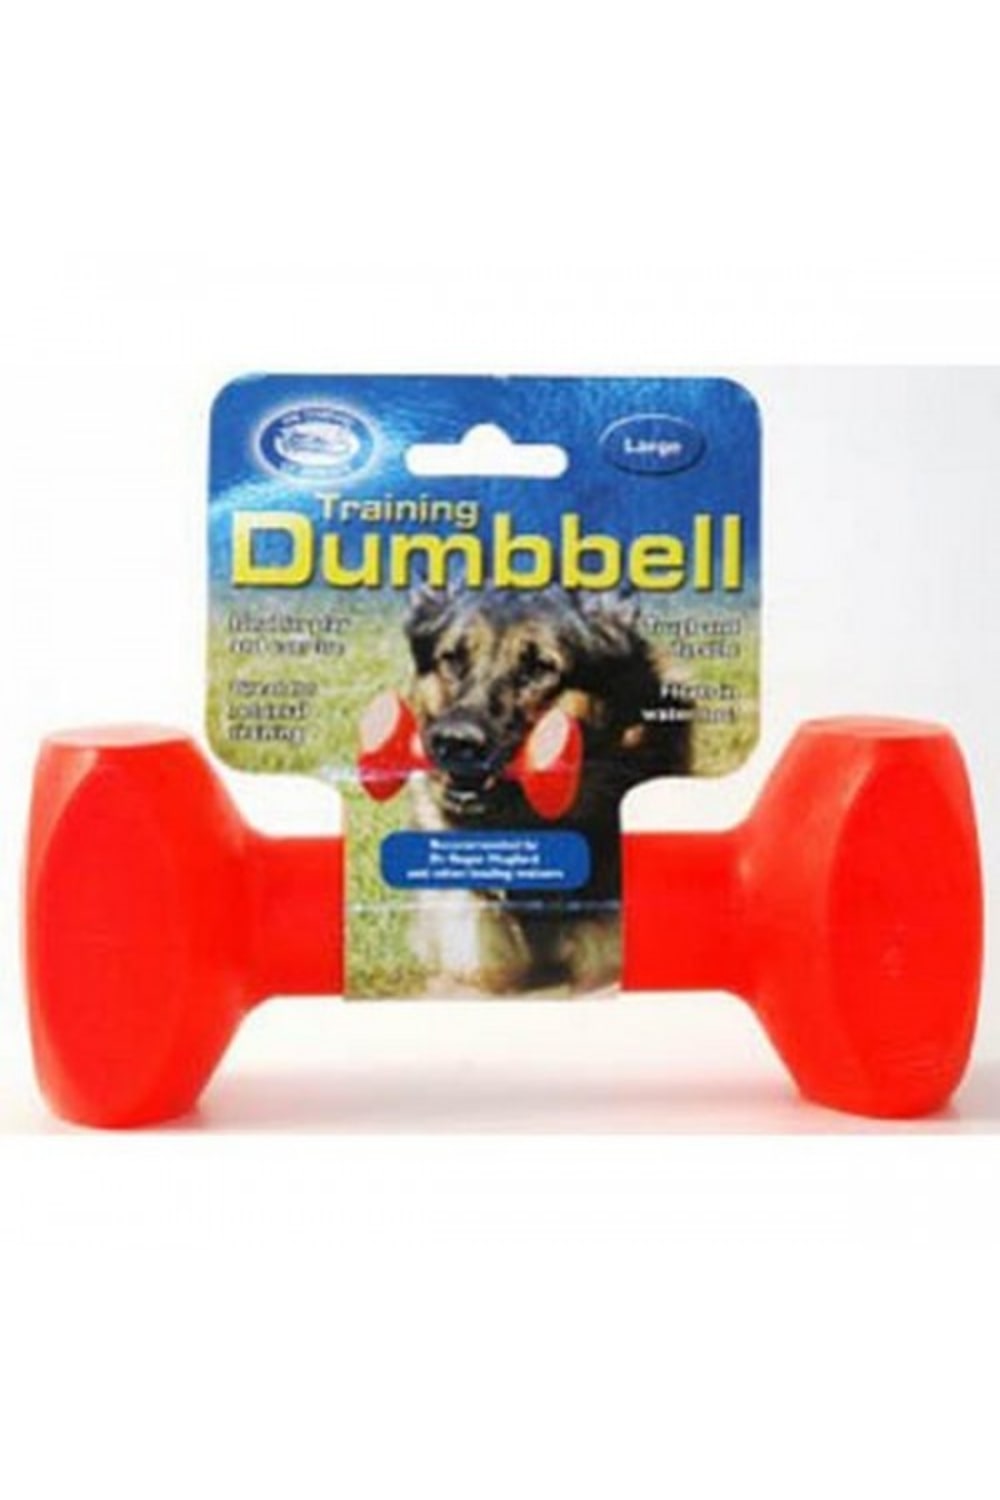 Company Of Animals Clix Dumbbell Dog Training Toy (Red) (M)